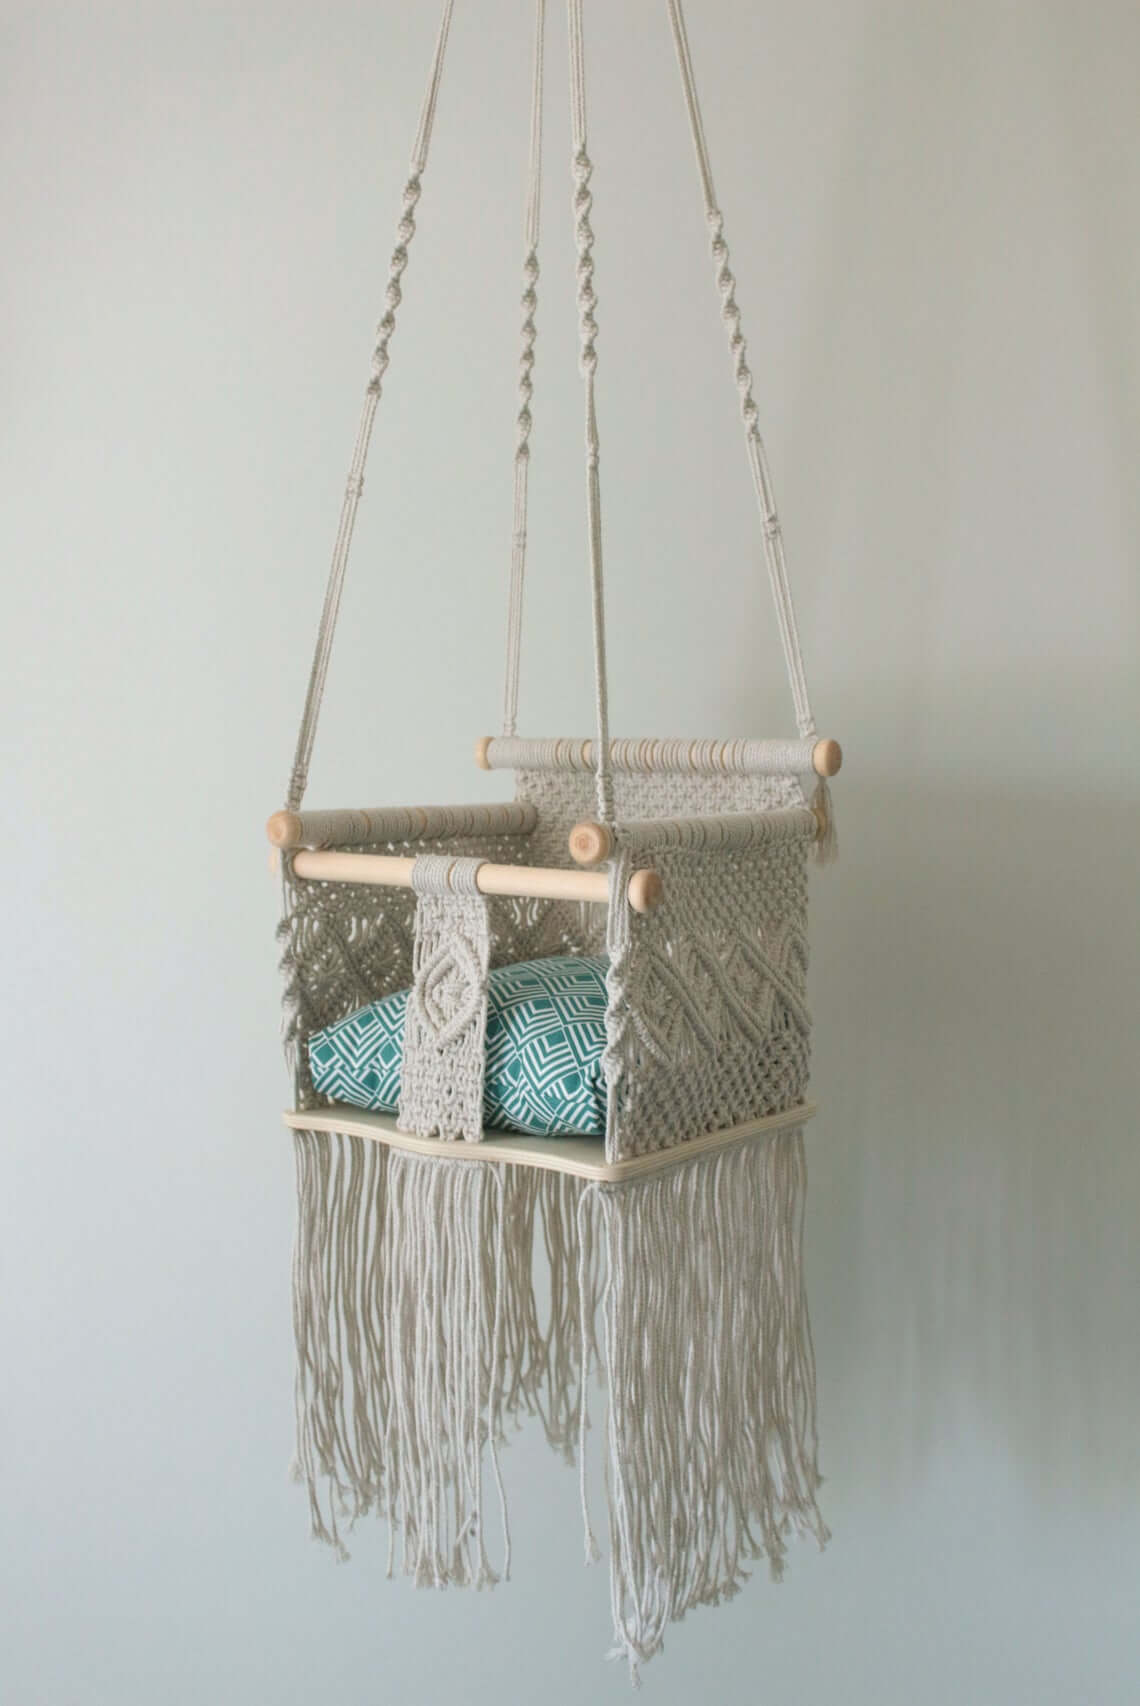 Charming and Cute Cushioned Macrame Baby Swing